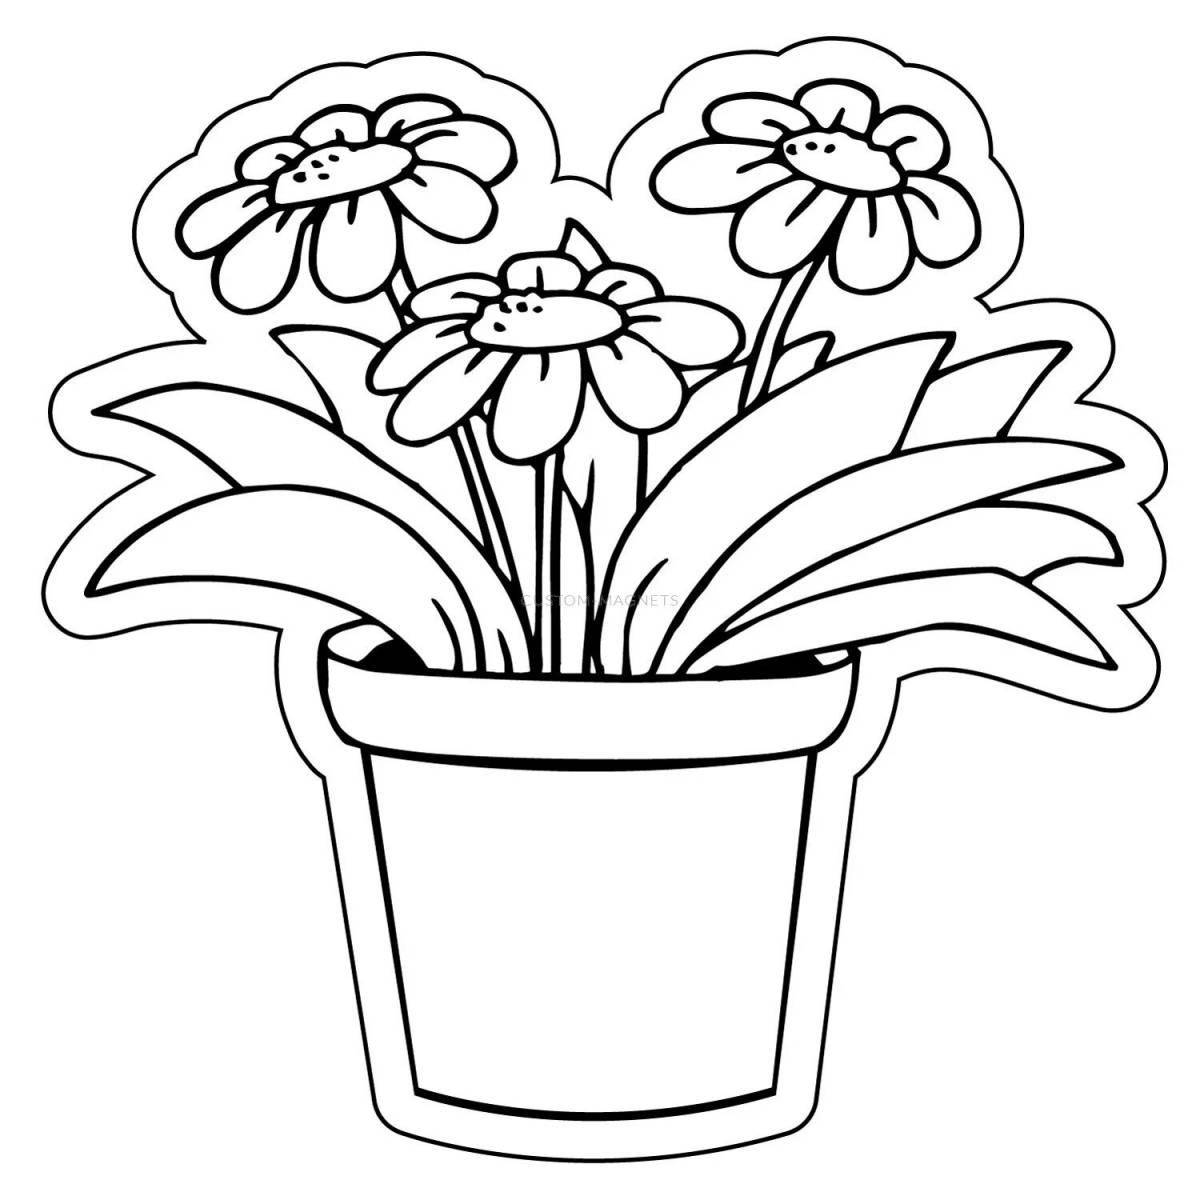 Outstanding flower pot coloring page for kids